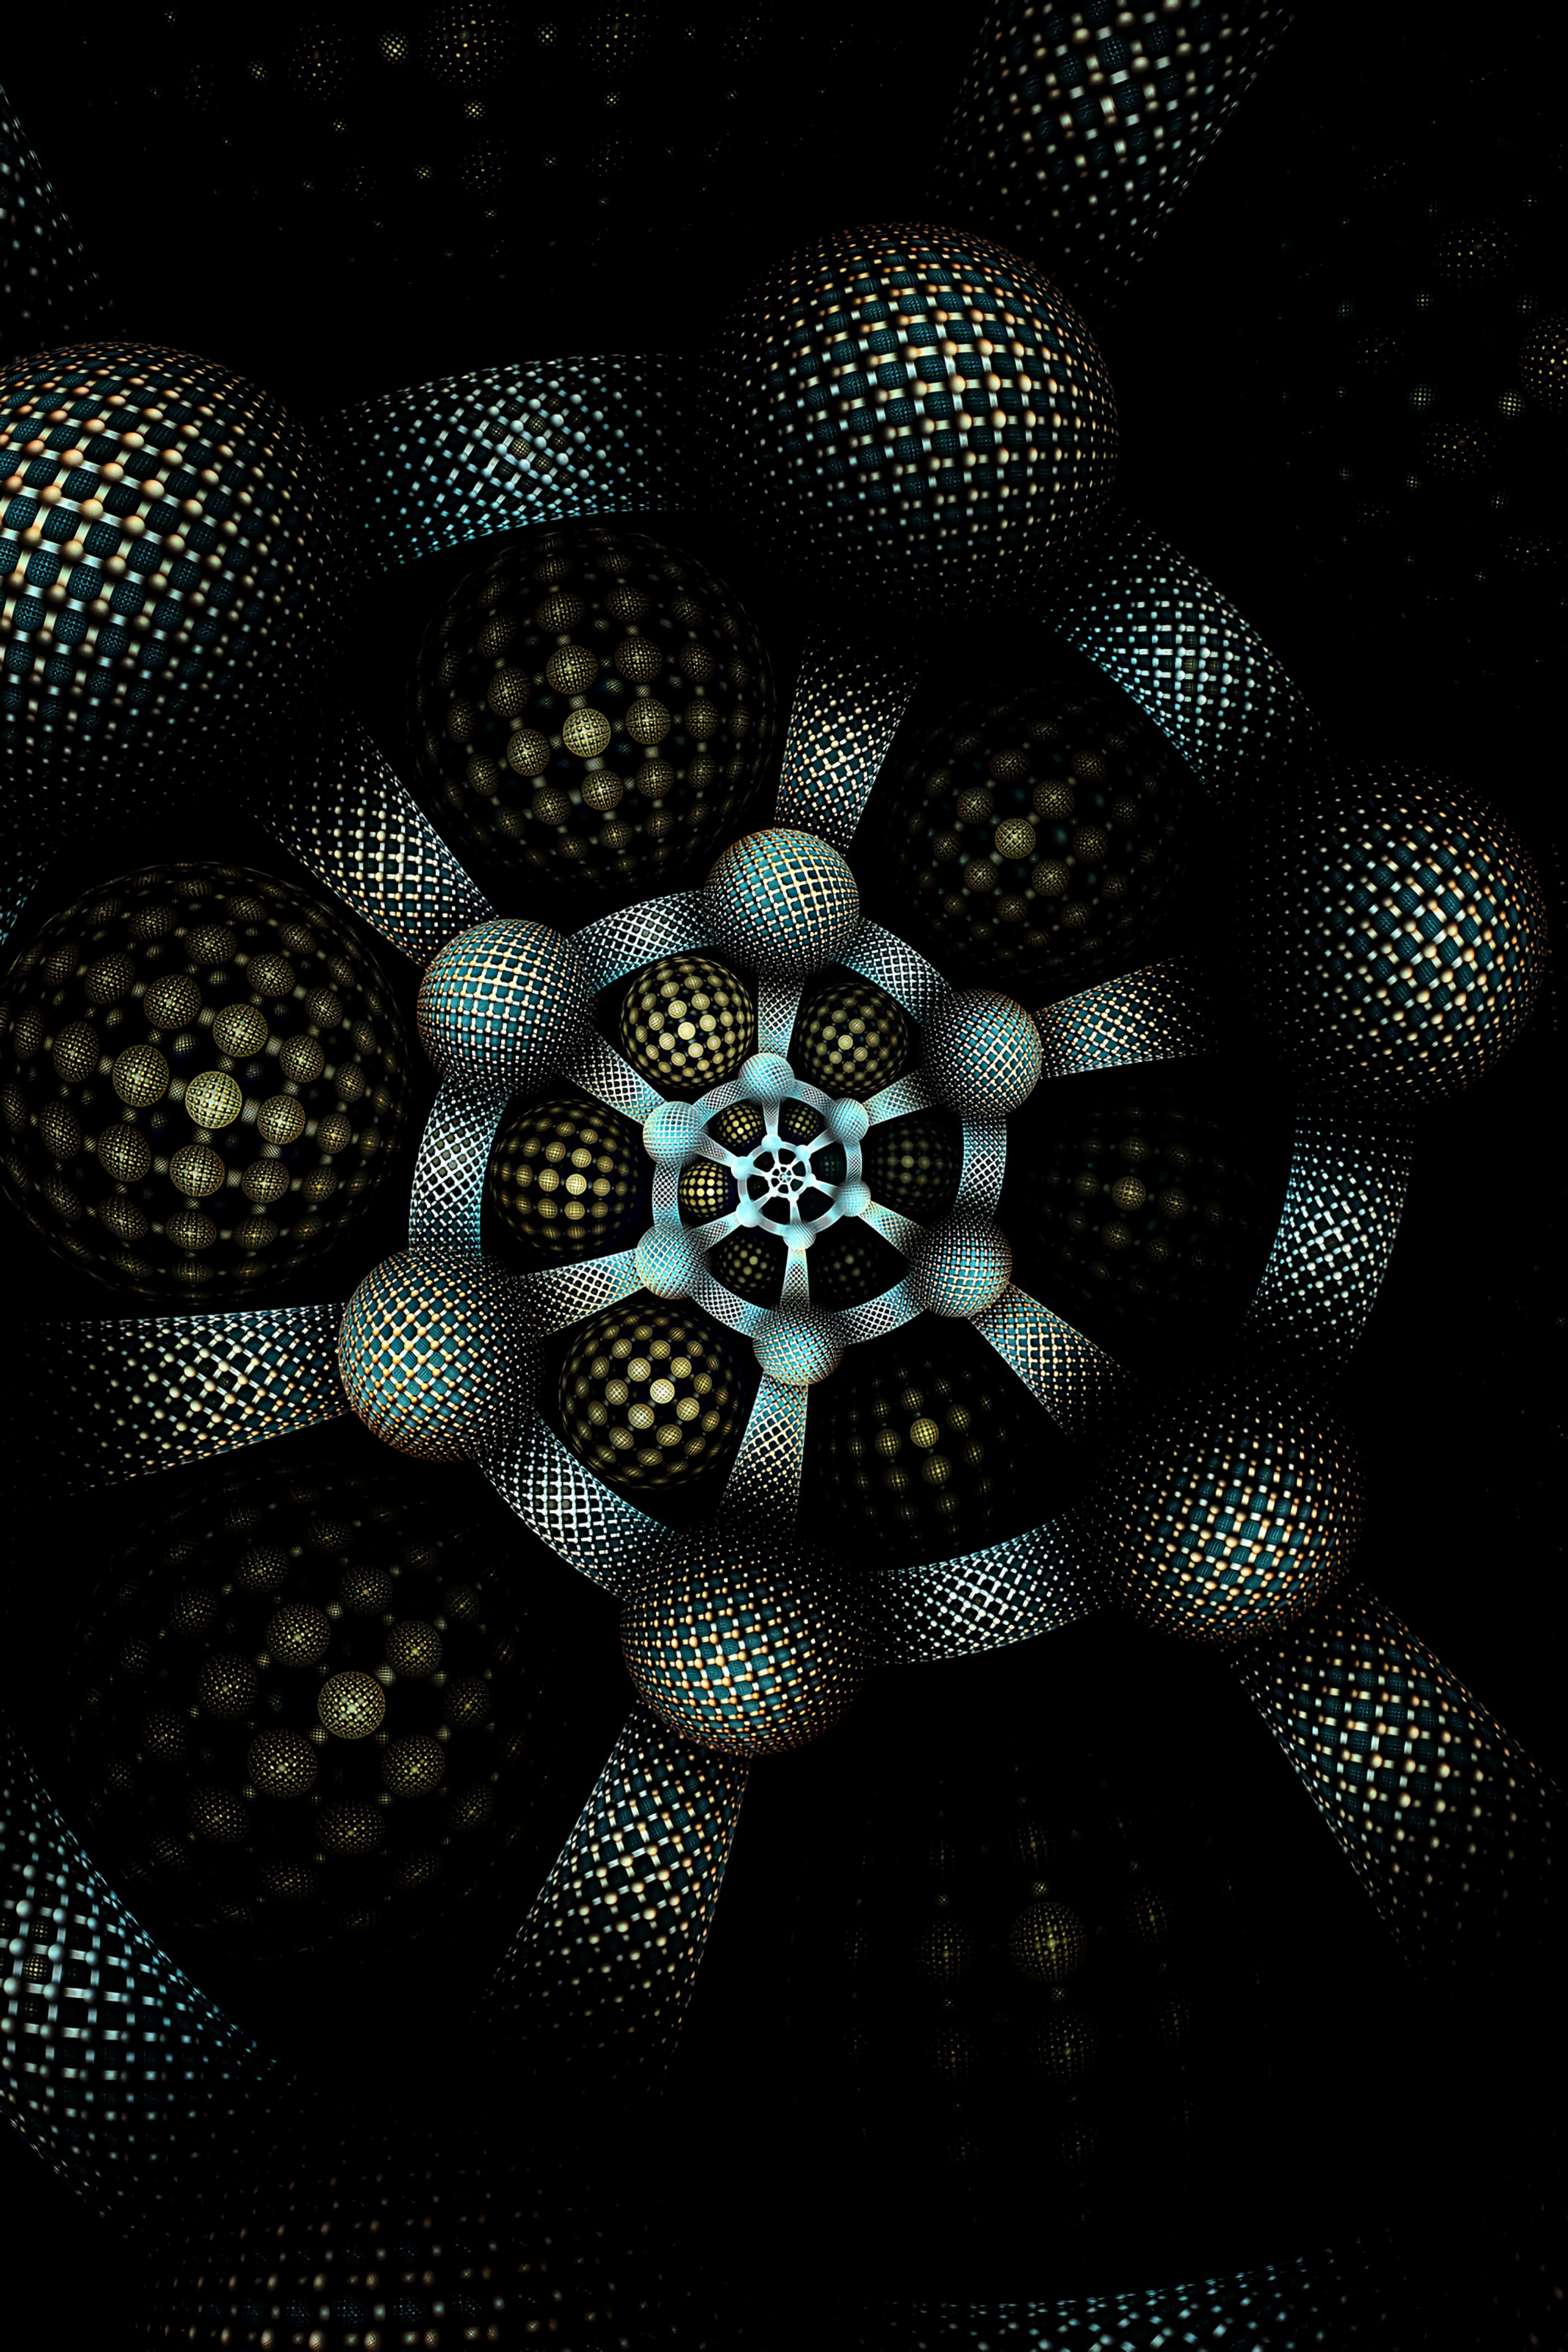 Free HD dark, form, circles, involute, abstract, pattern, fractal, swirling